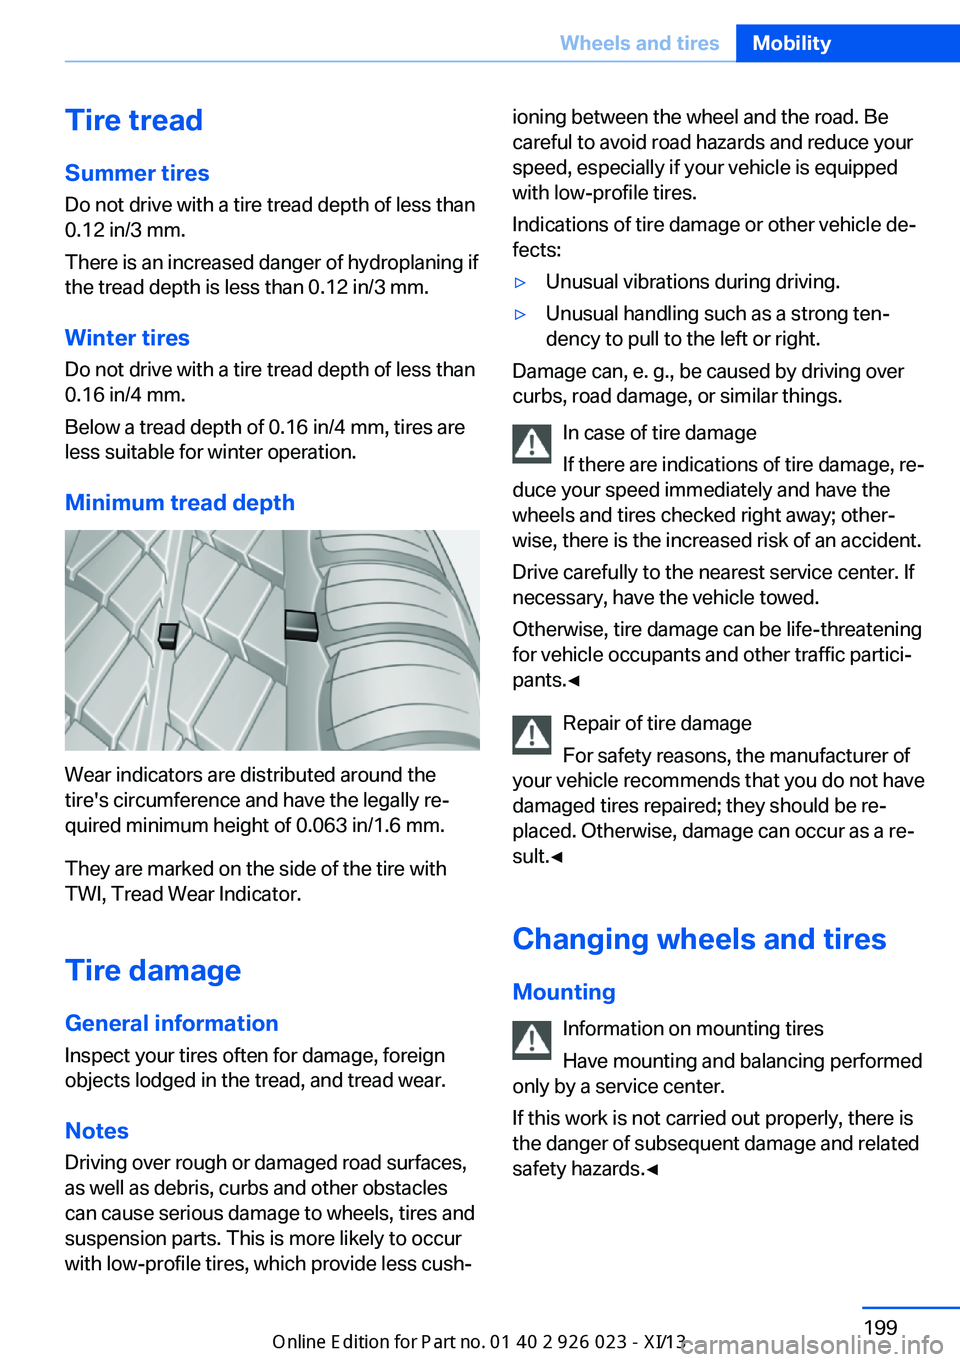 BMW 6 SERIES GRAN COUPE 2013 F06 Owners Manual Tire treadSummer tires
Do not drive with a tire tread depth of less than
0.12 in/3 mm.
There is an increased danger of hydroplaning if
the tread depth is less than 0.12 in/3 mm.
Winter tires Do not dr